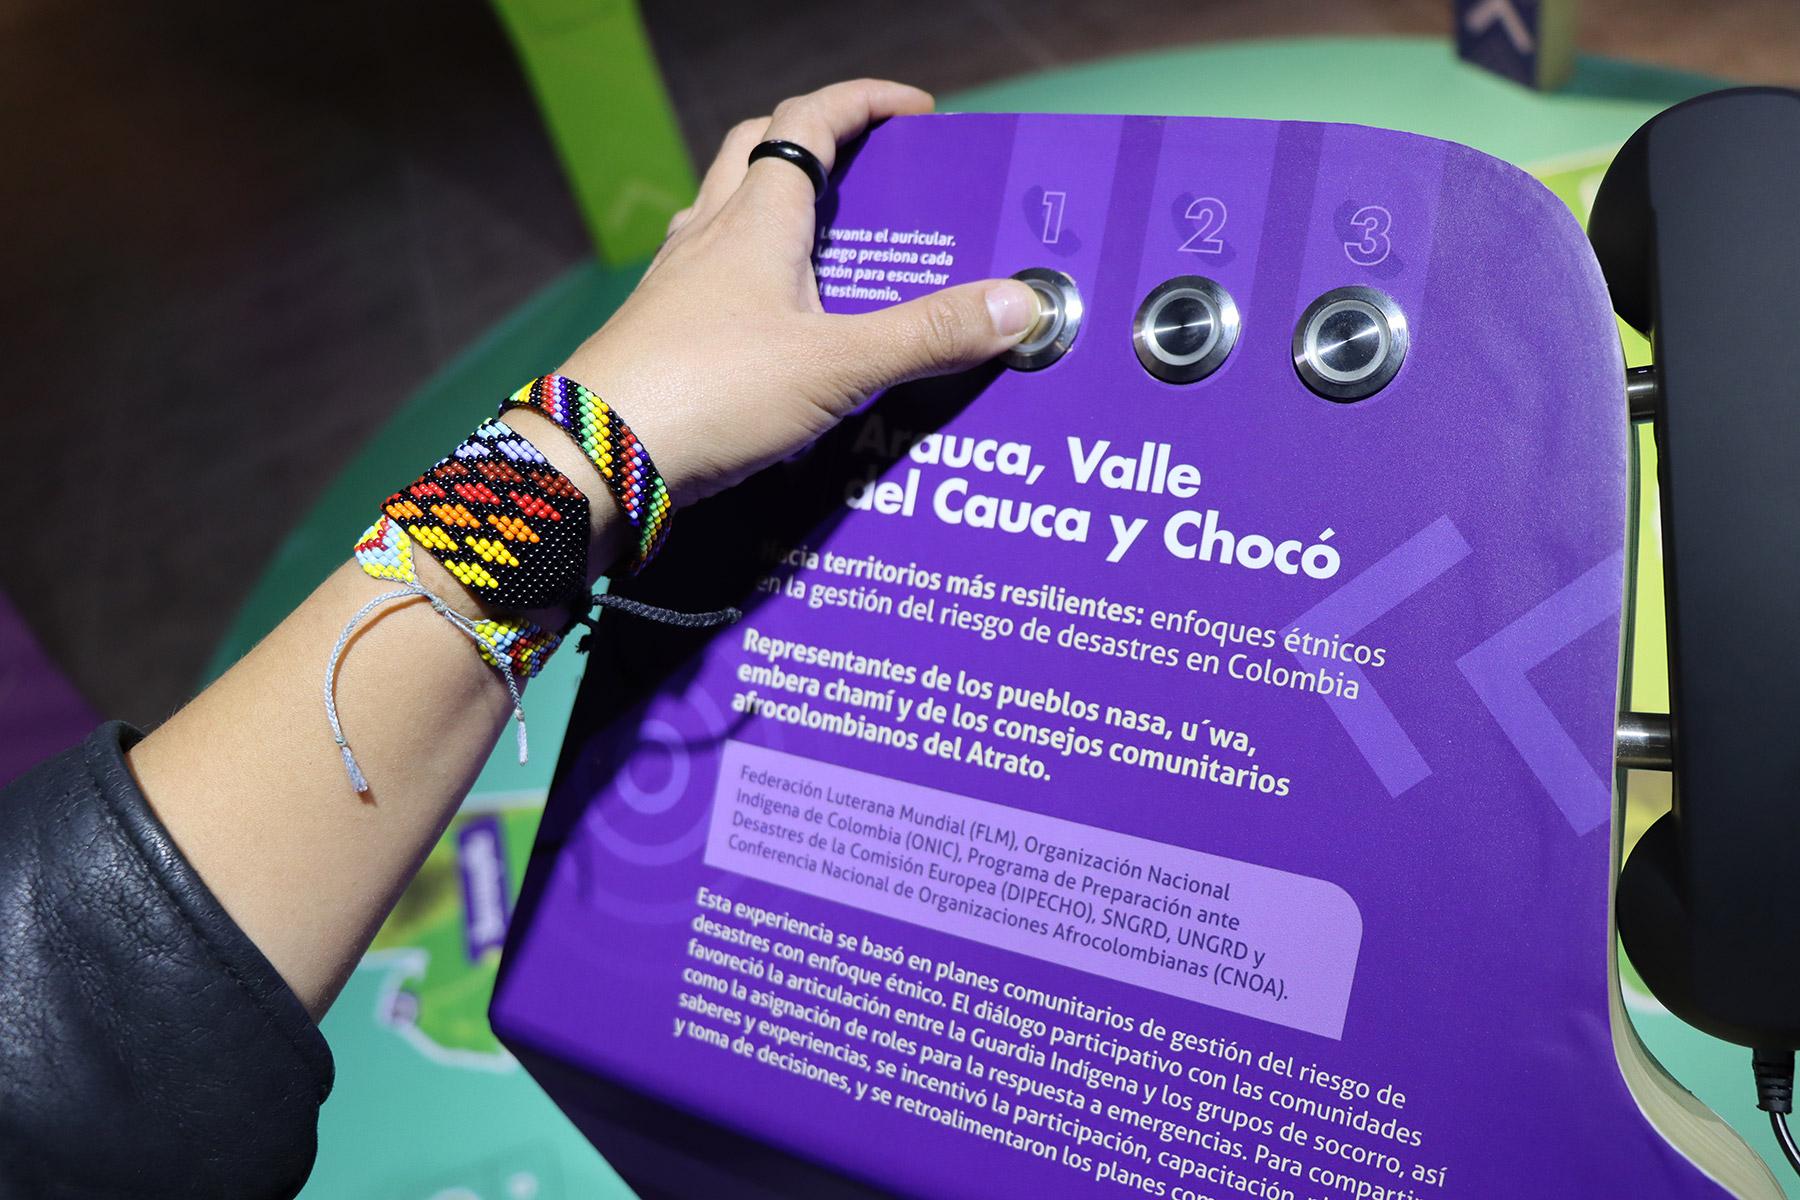 A display at the MAGMA interactive museum of risk showcases LWF Colombia-Venezuela's work in pioneering in ethnically sensitive approaches to disaster risk reduction. Photo: LWF Colombia